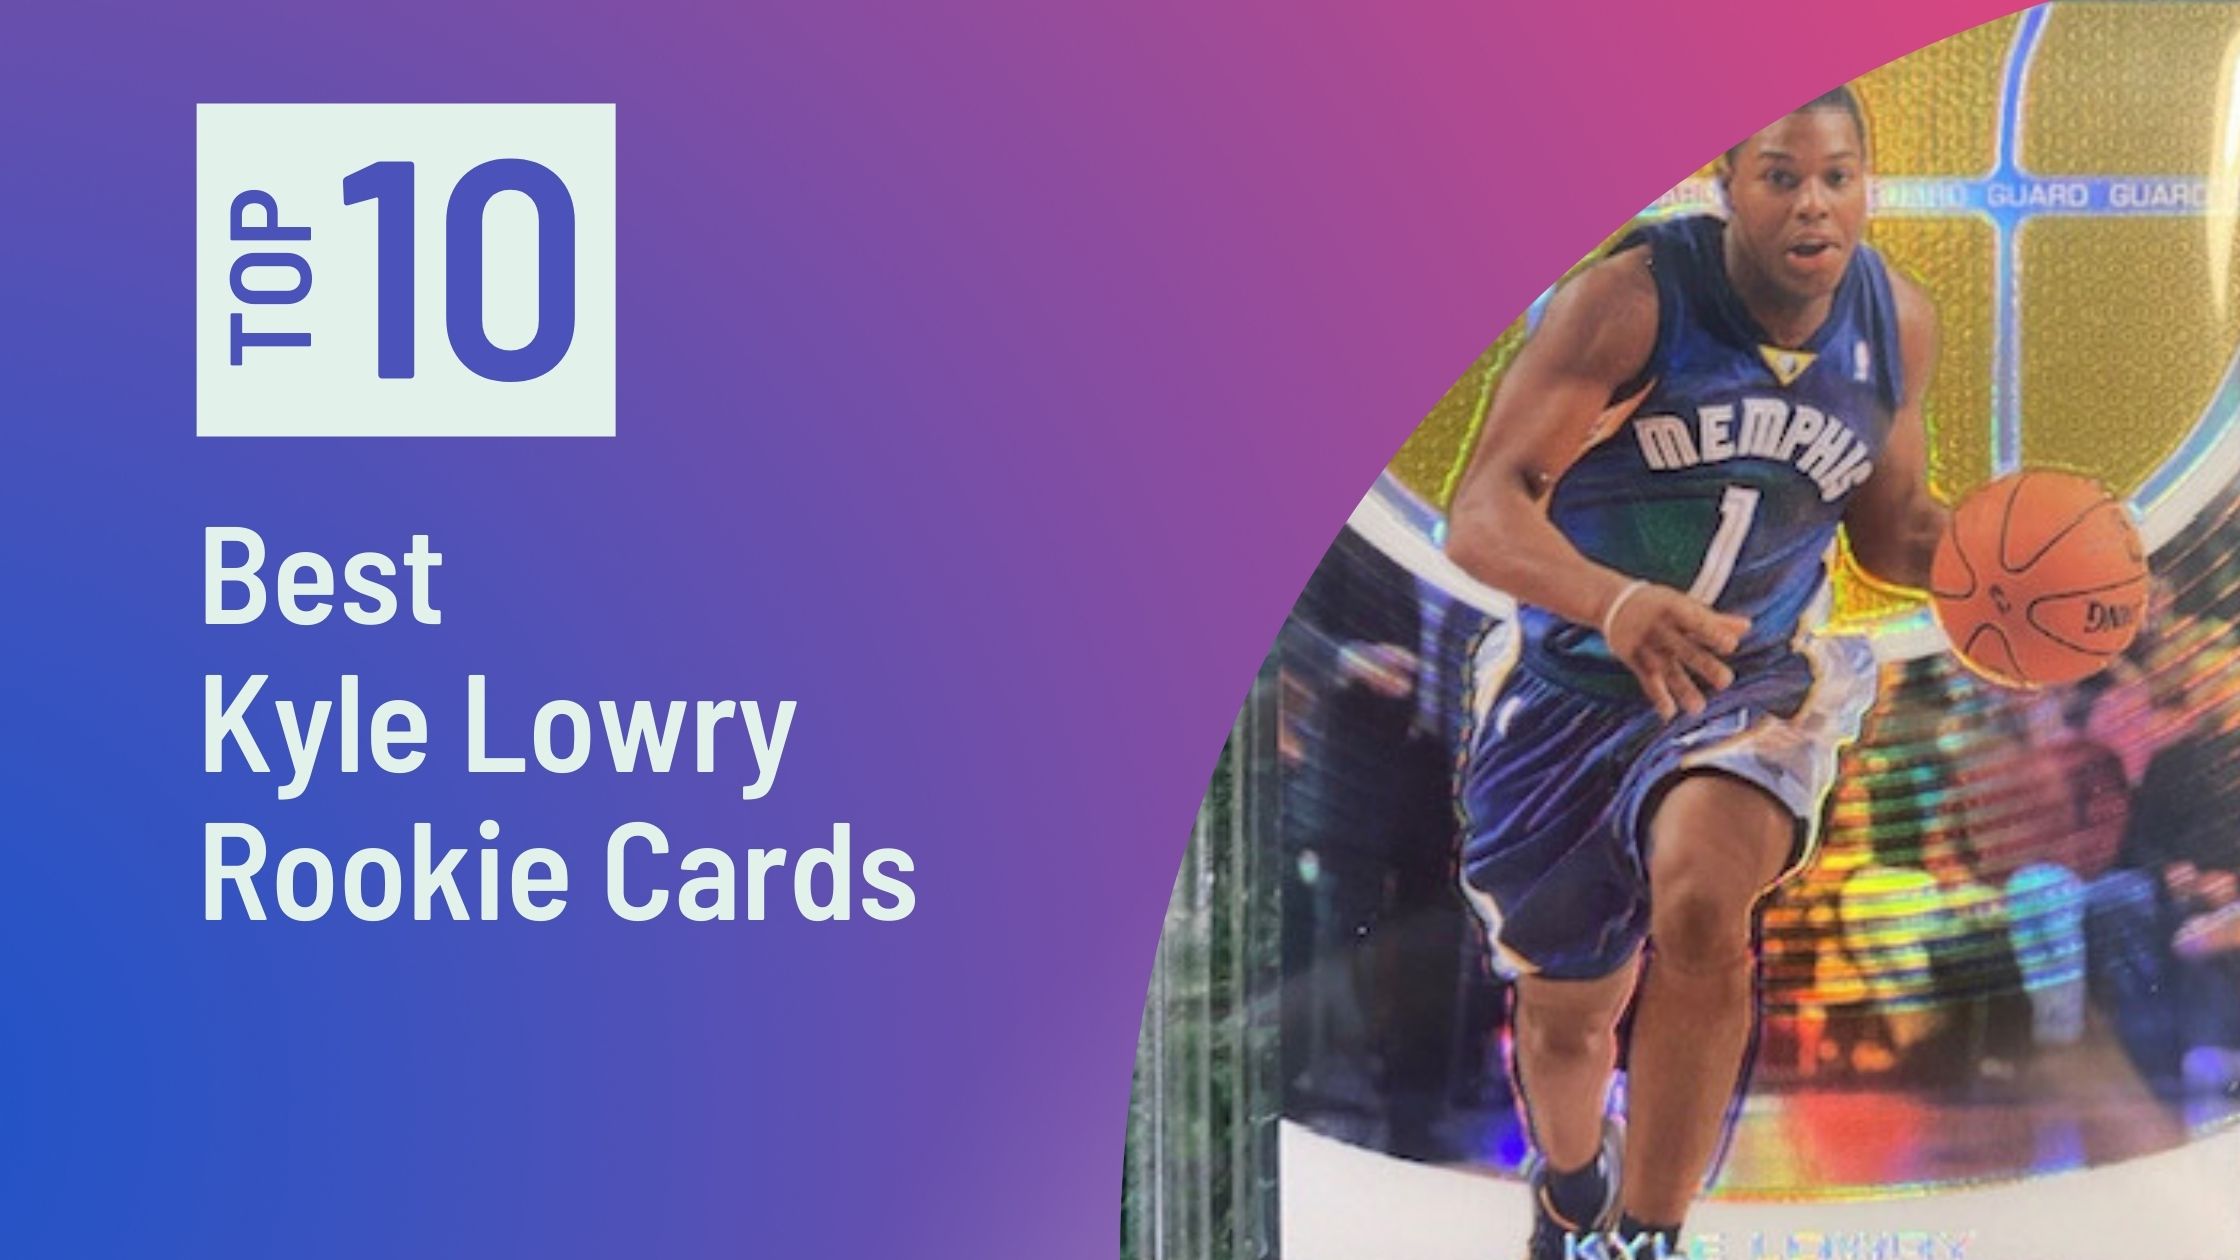 Featured Images for the Best Kyle Lowry Rookie Cards blog post